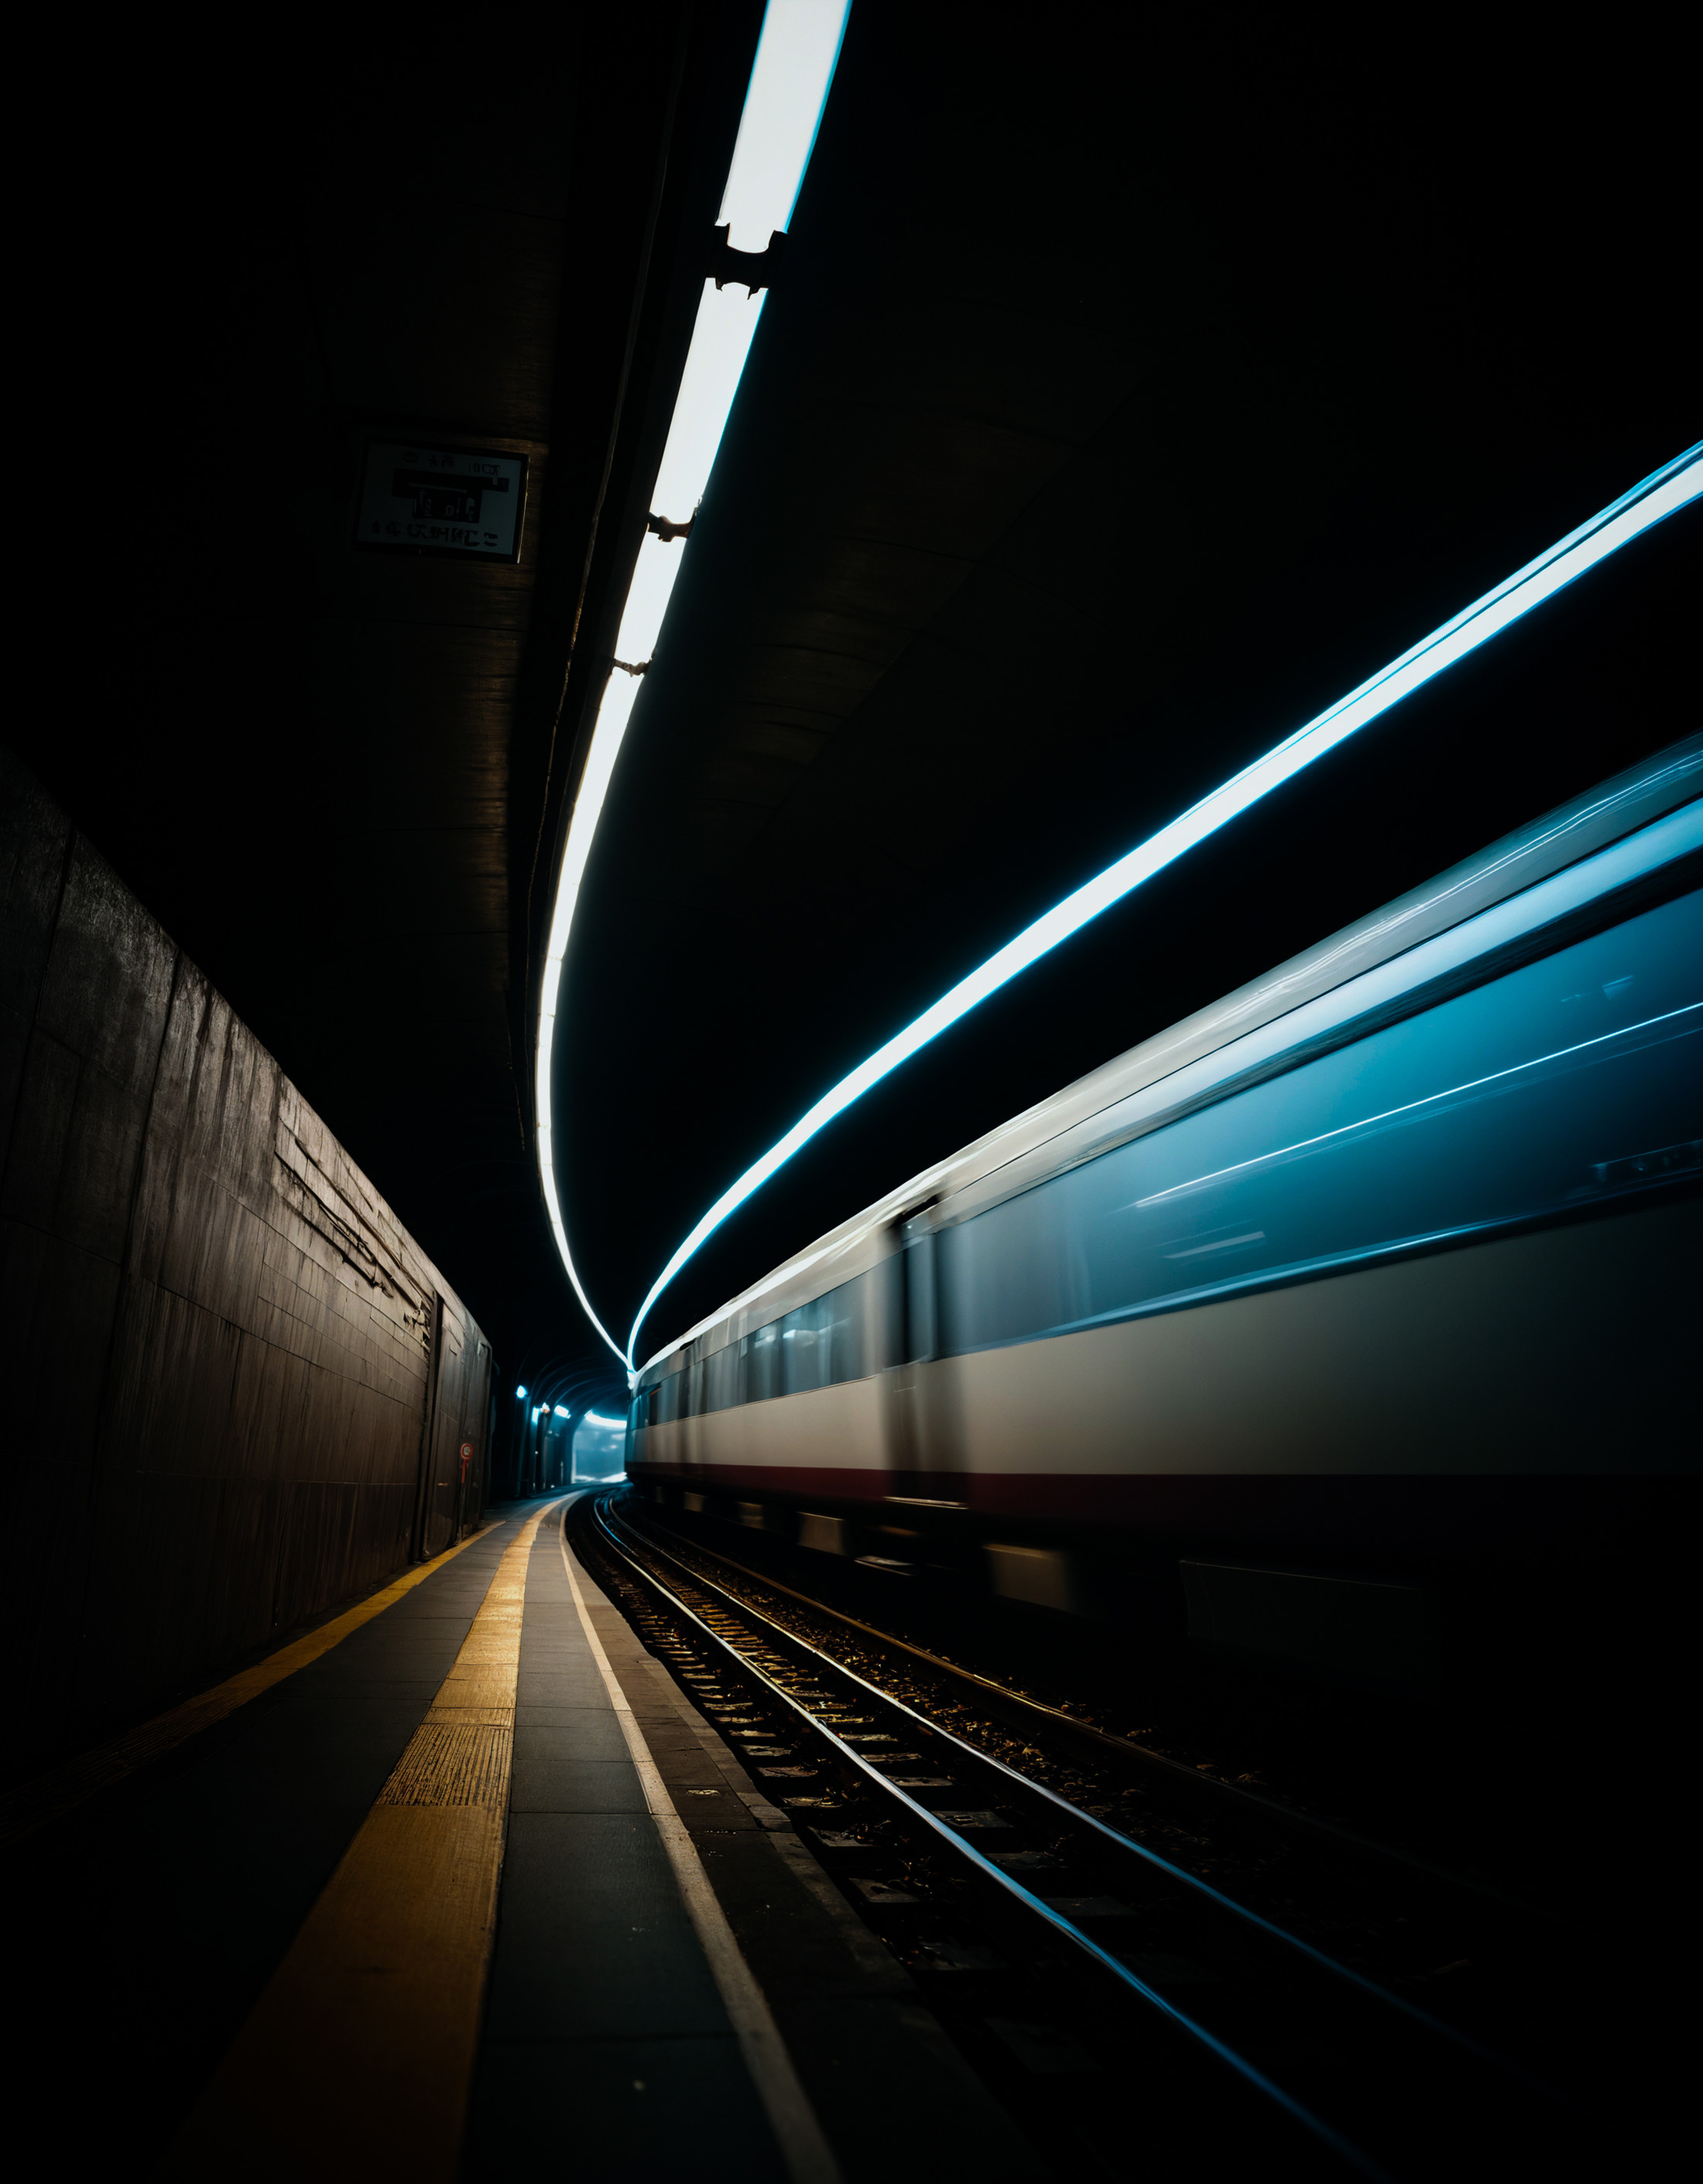 award winning photo of a train going through a tunnel at night, zavy-lghttrl, atmospheric haze, dynamic angle, cinematic s...